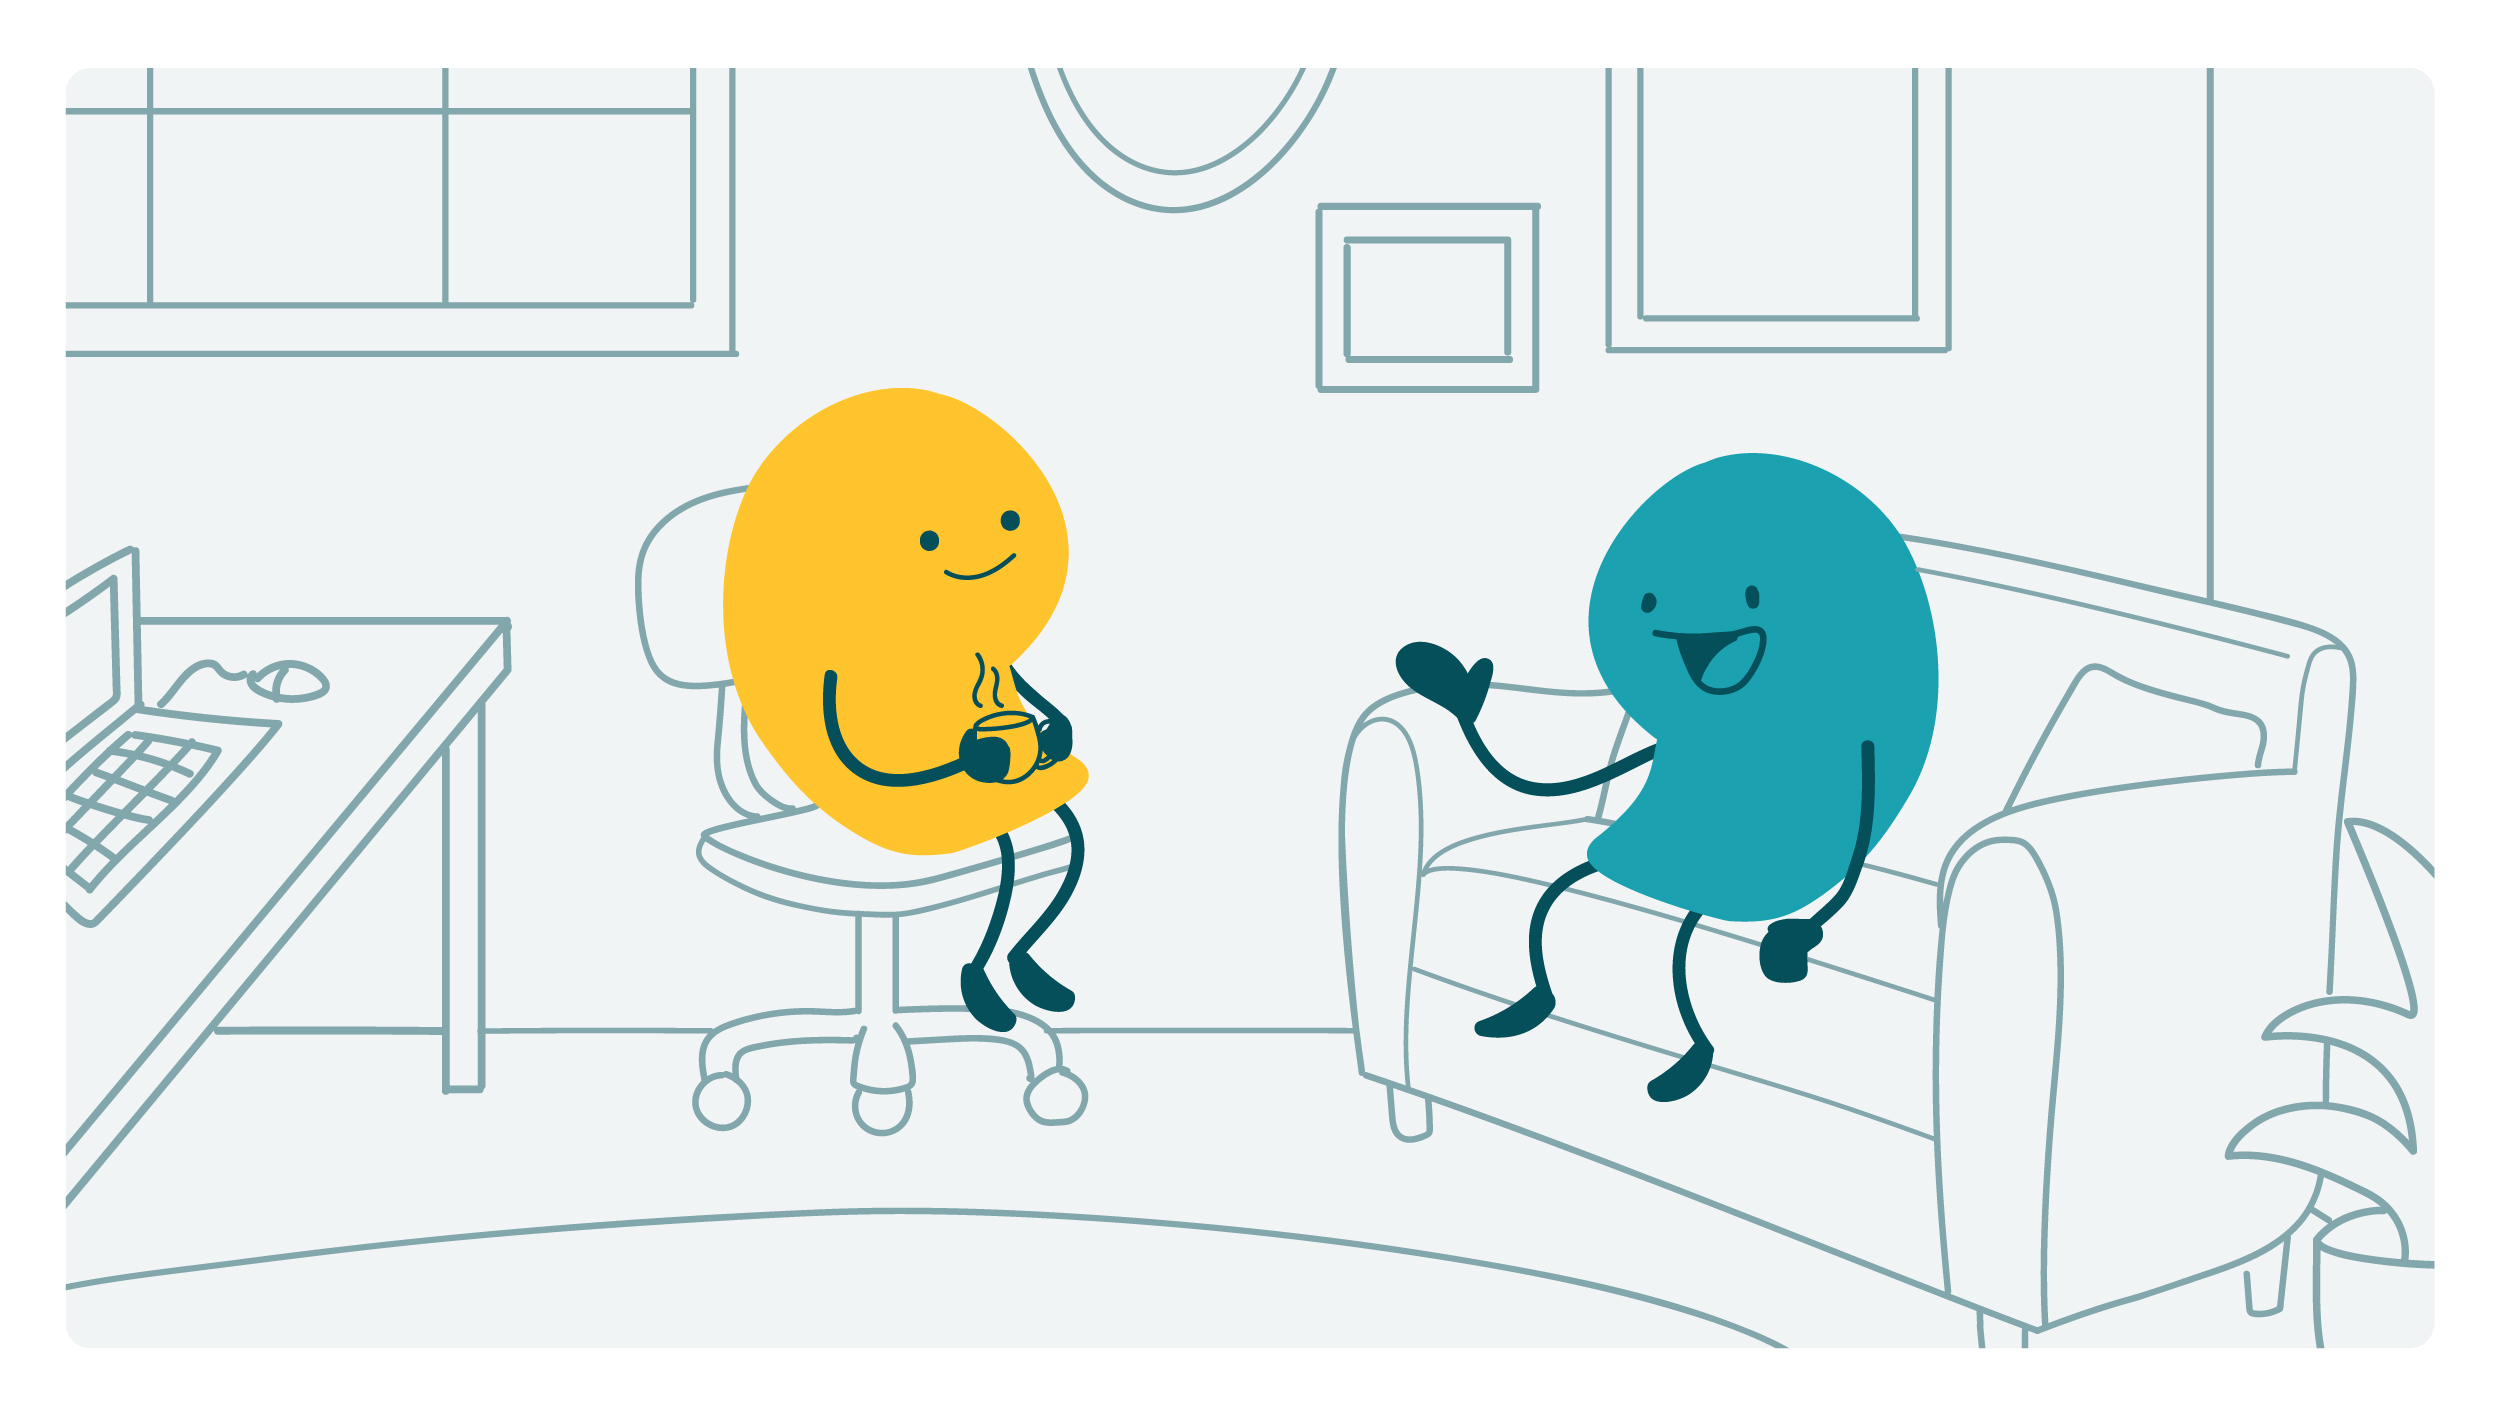 2 smiling doodles talk to each other in an office setting.